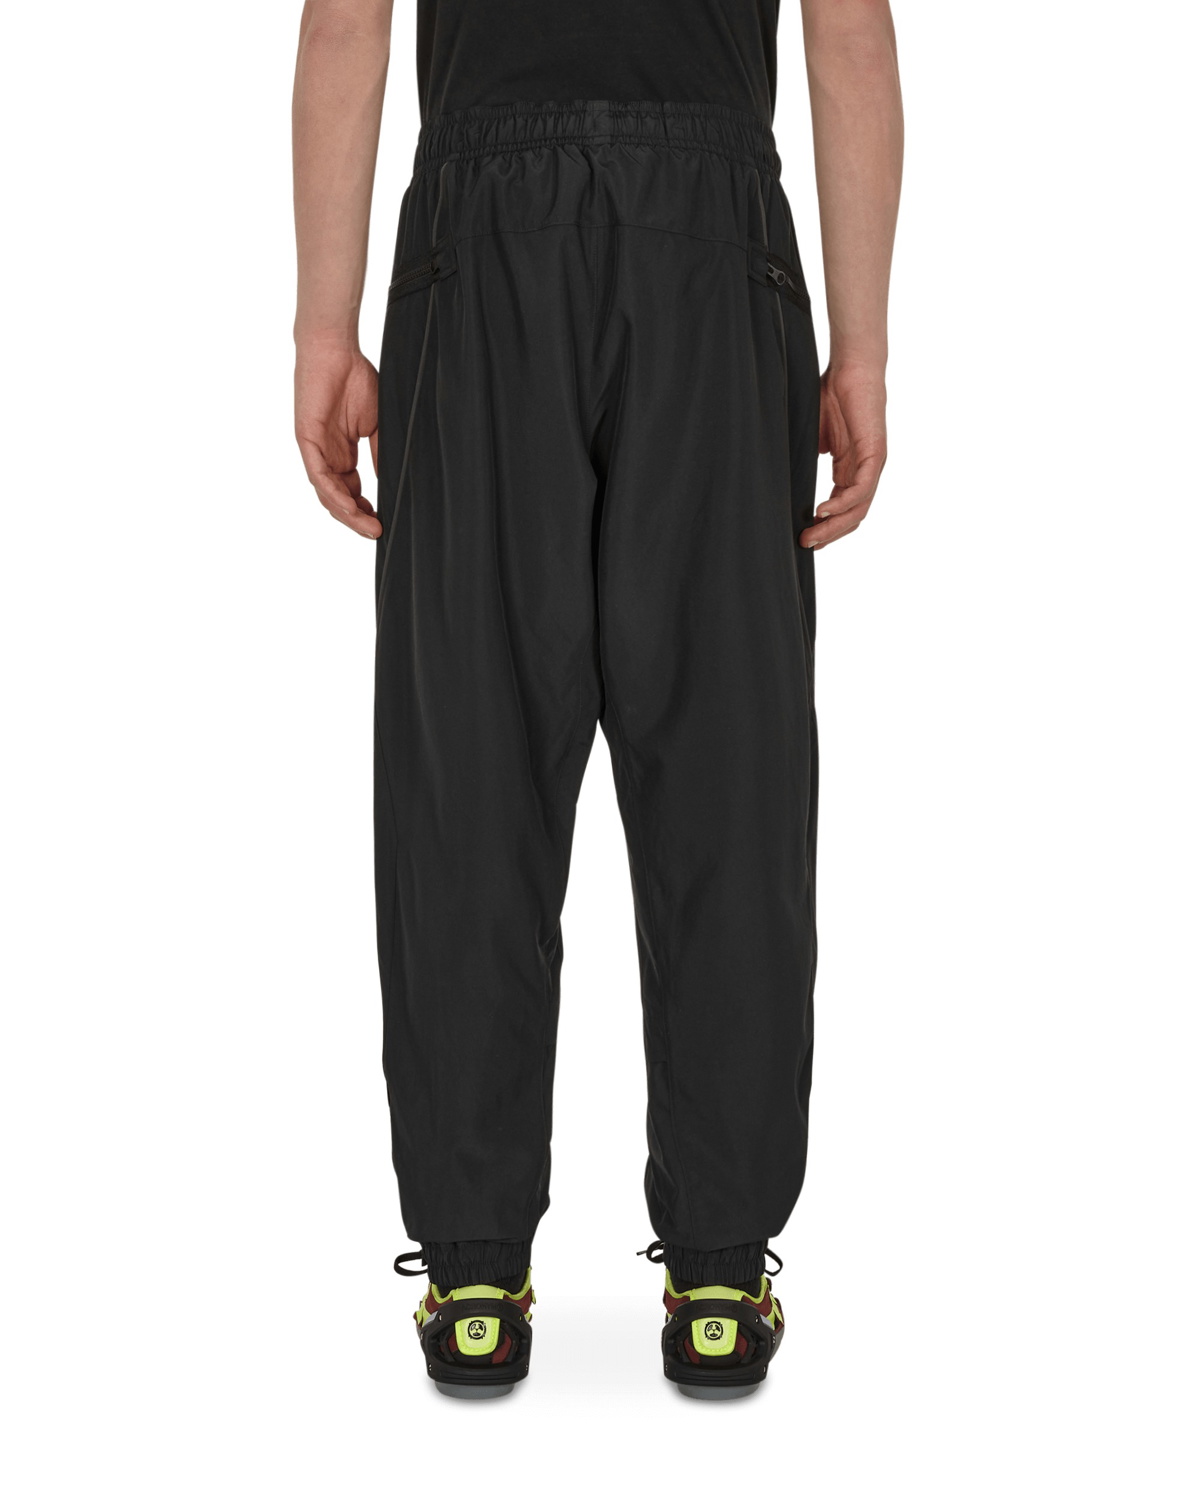 Acronym® Woven Pants Nike Special Project